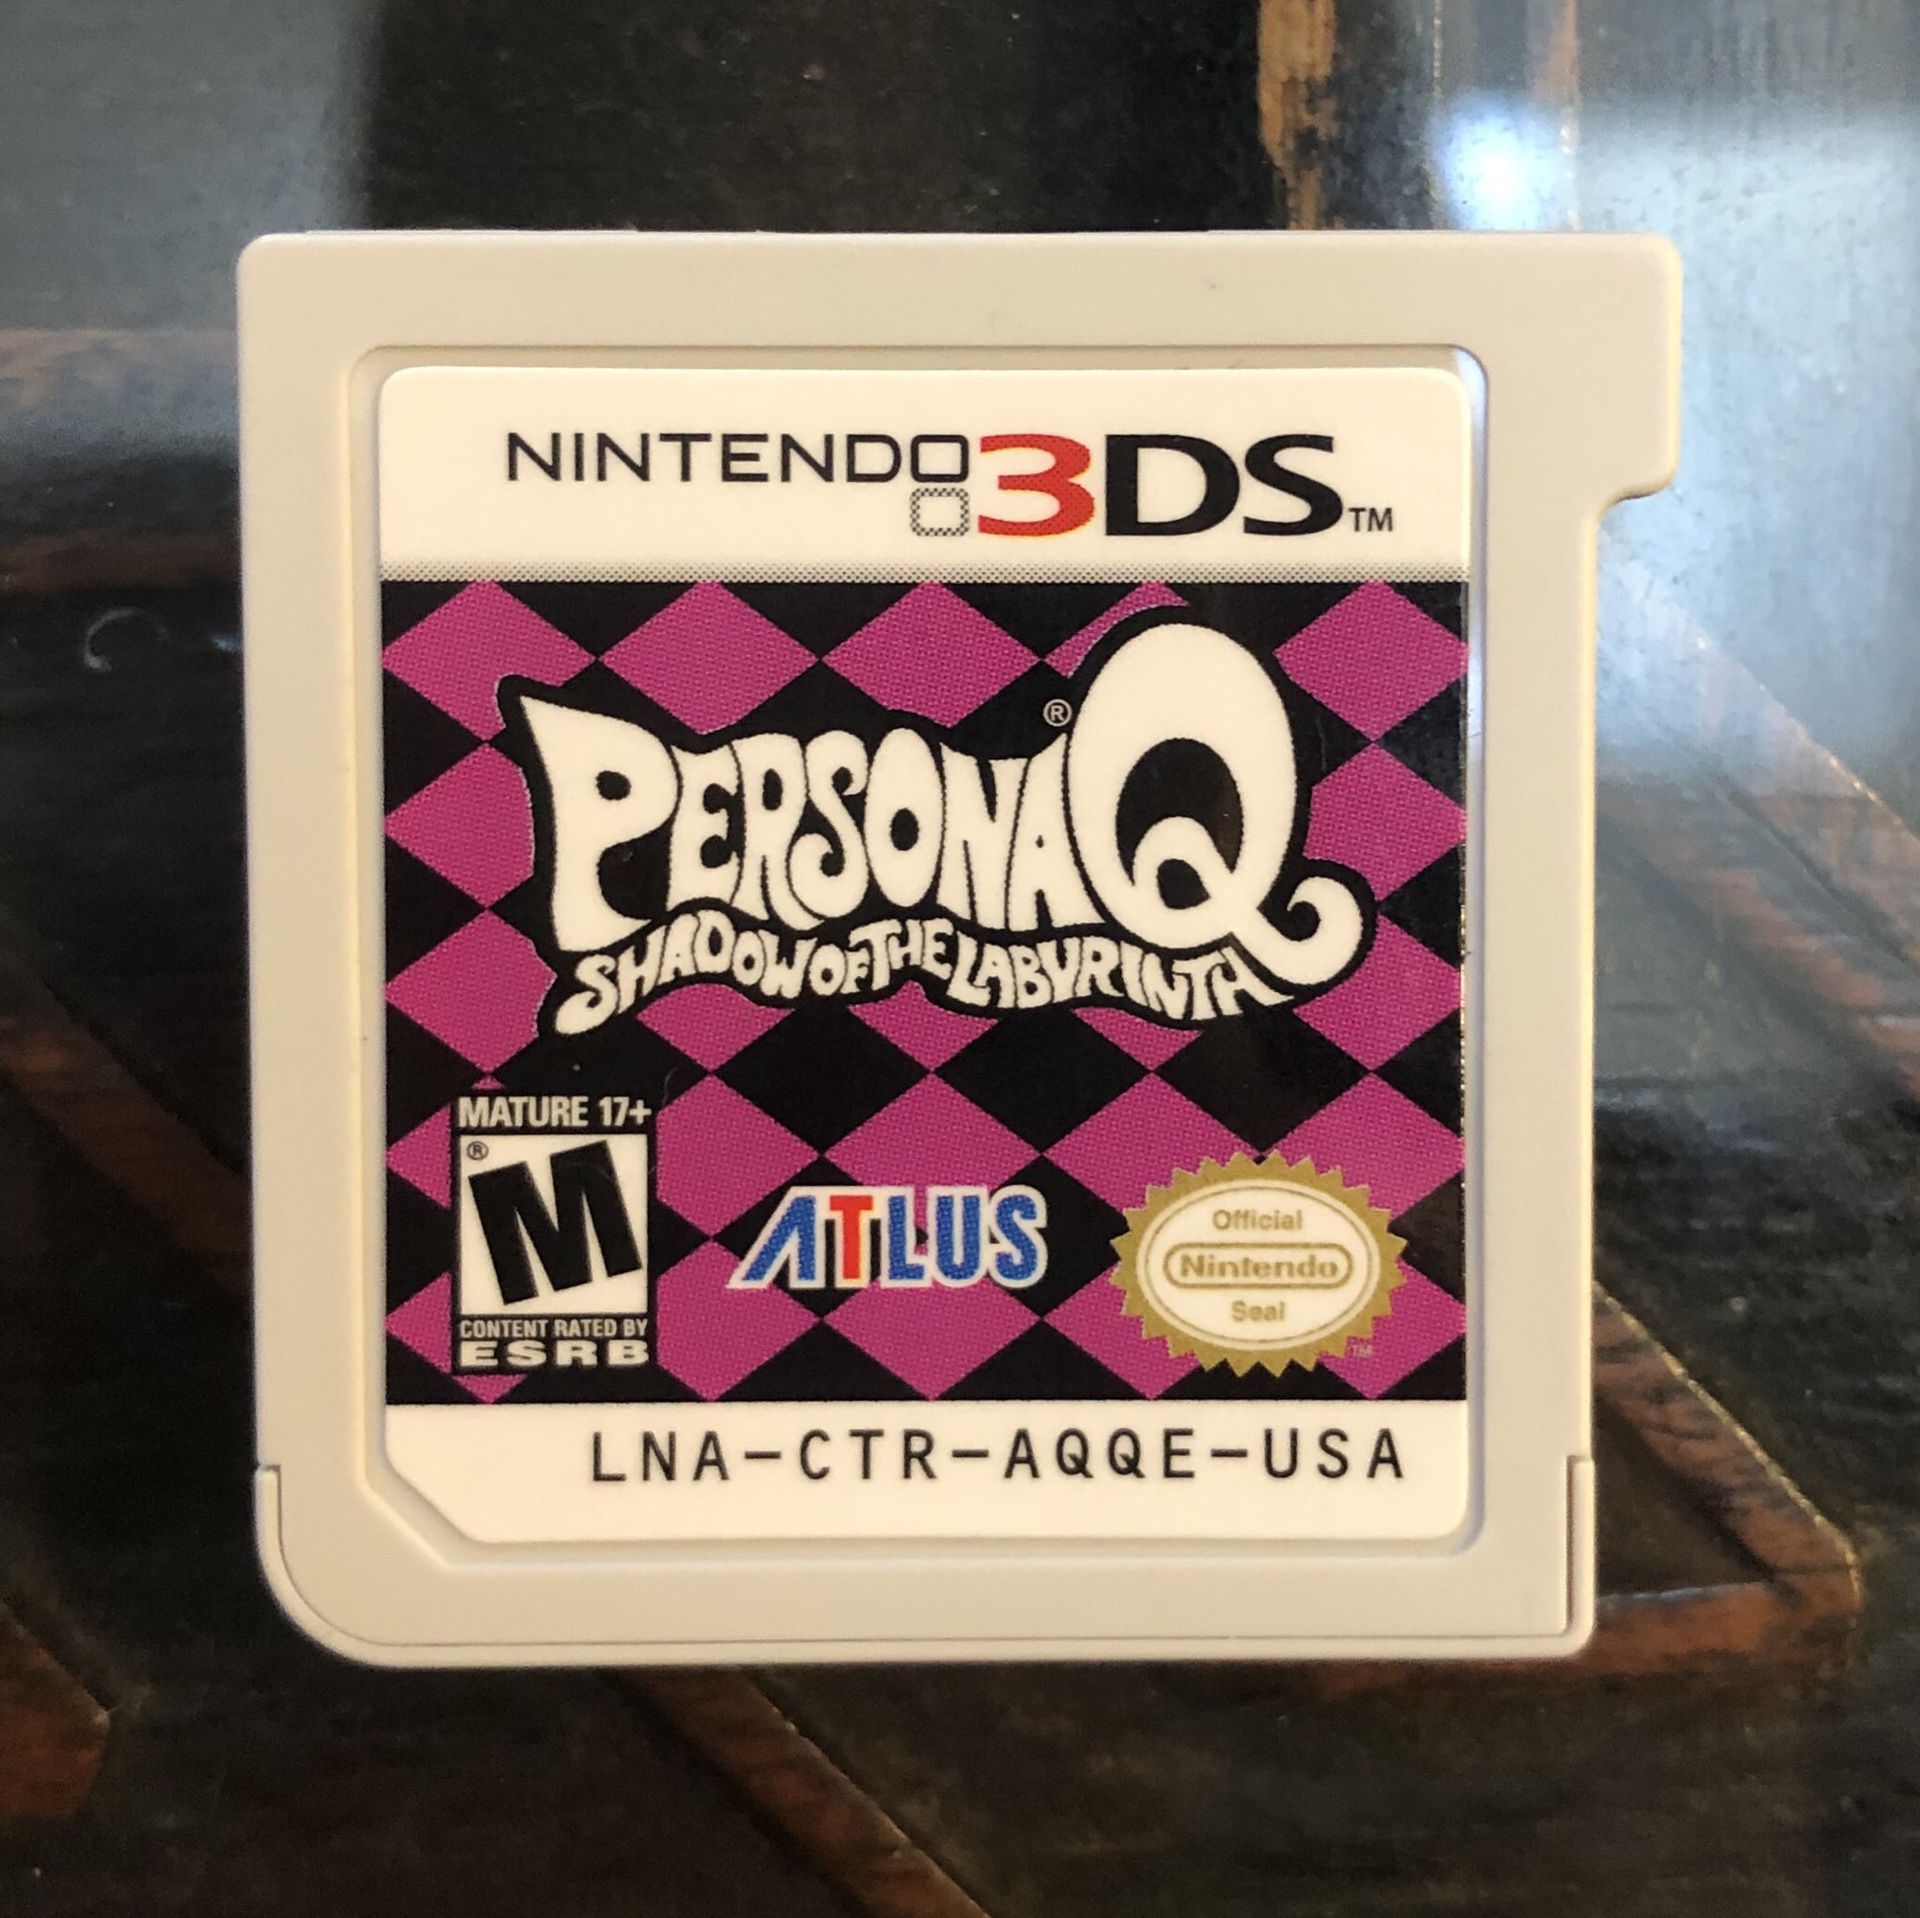 Nintendo 3DS ~ Persona Q Shadow of the Labyrinth